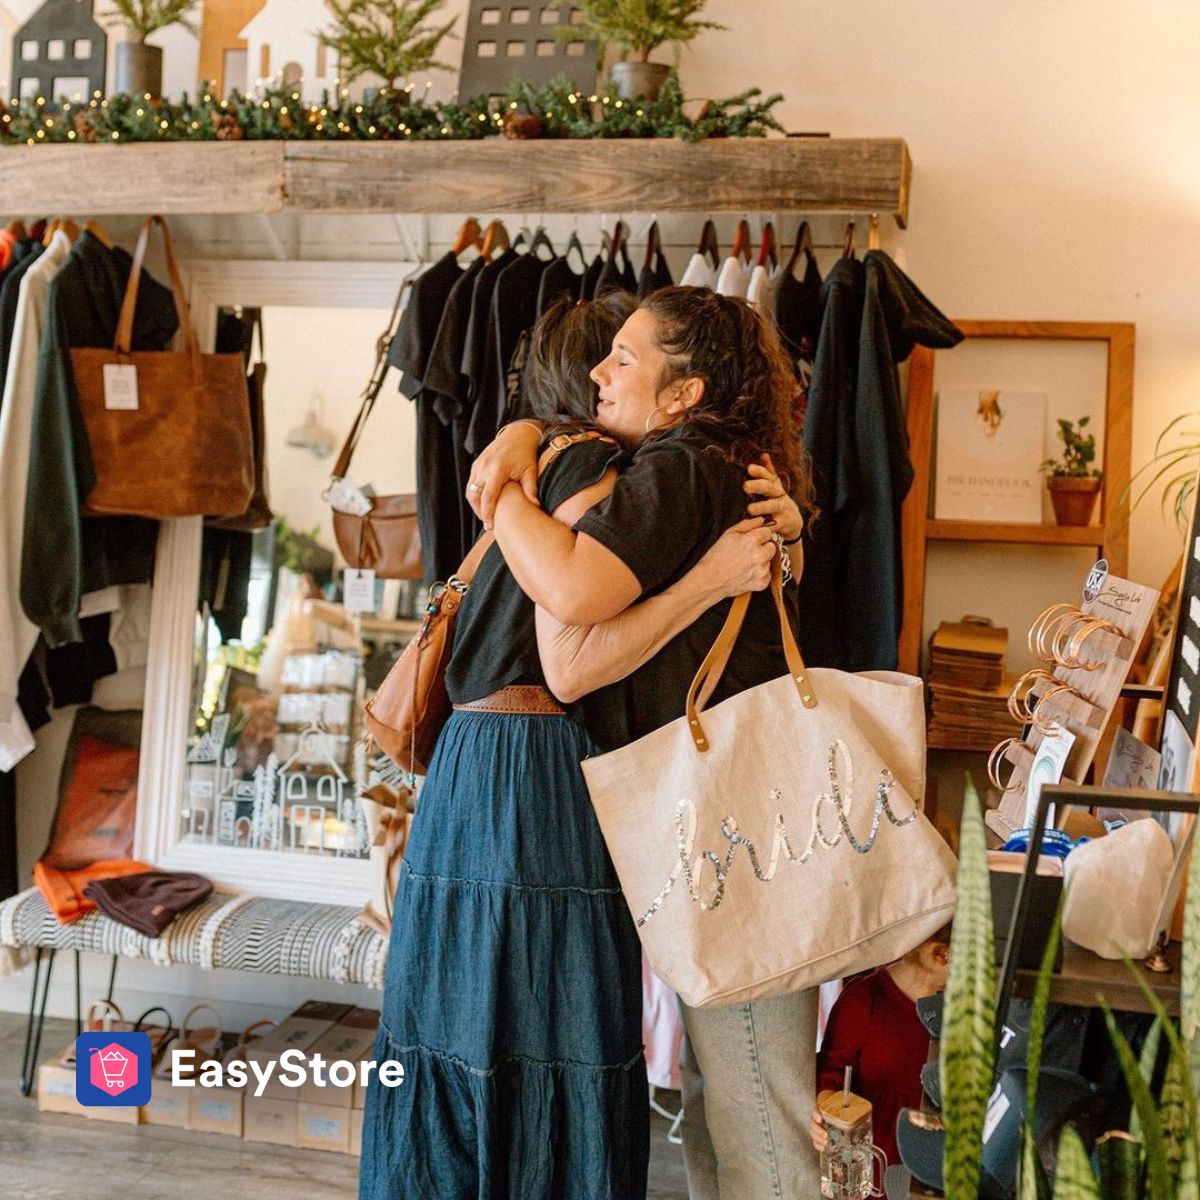 Experience Matters: How EasyStore is Bringing Humanity Back to Retail In-Store & Ecommerce Shopping | EasyStore